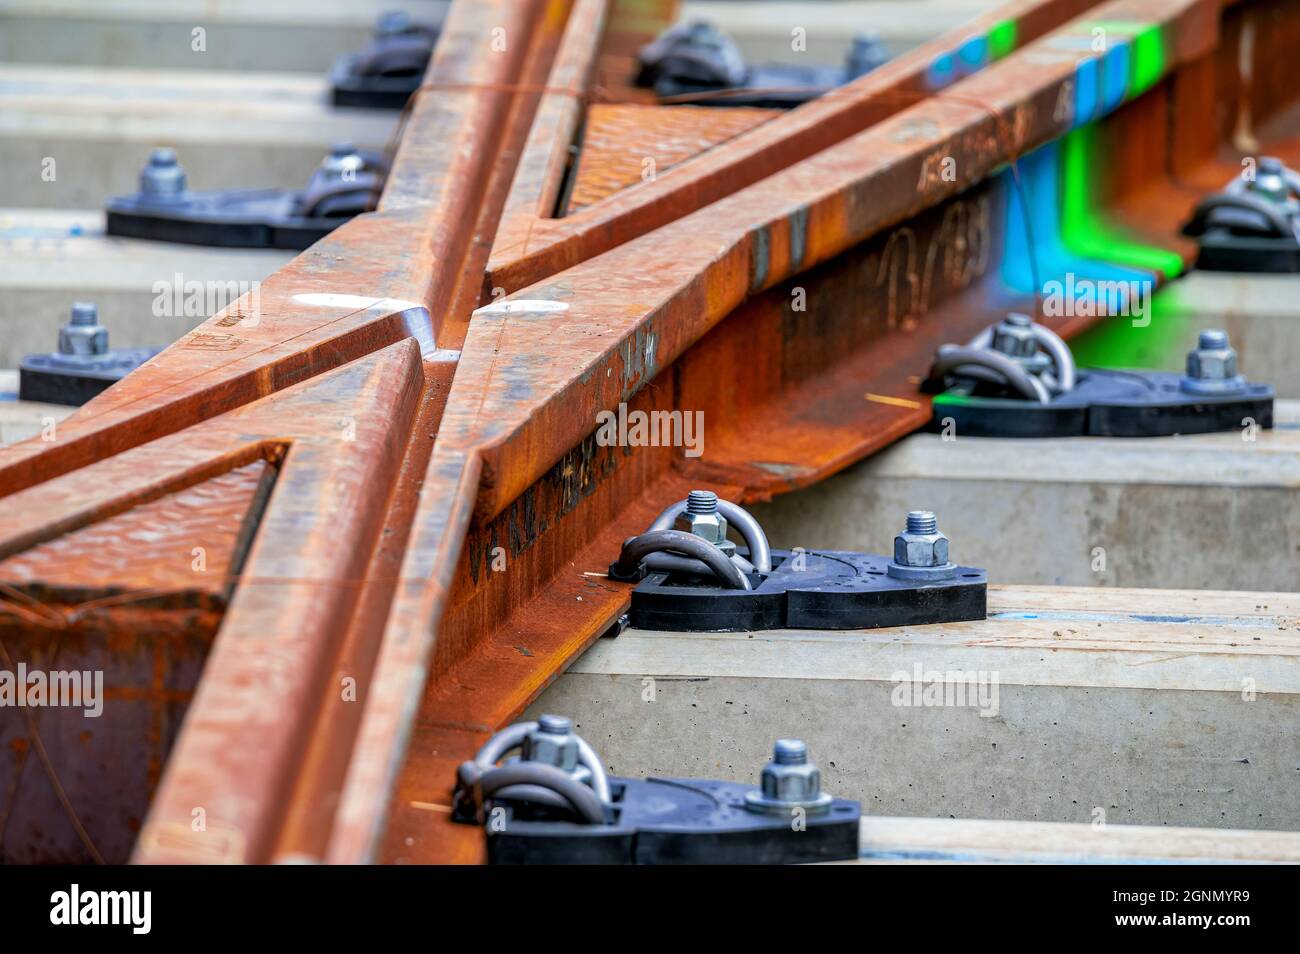 Setting the course: Construction work with laying tram tracks. Stock Photo